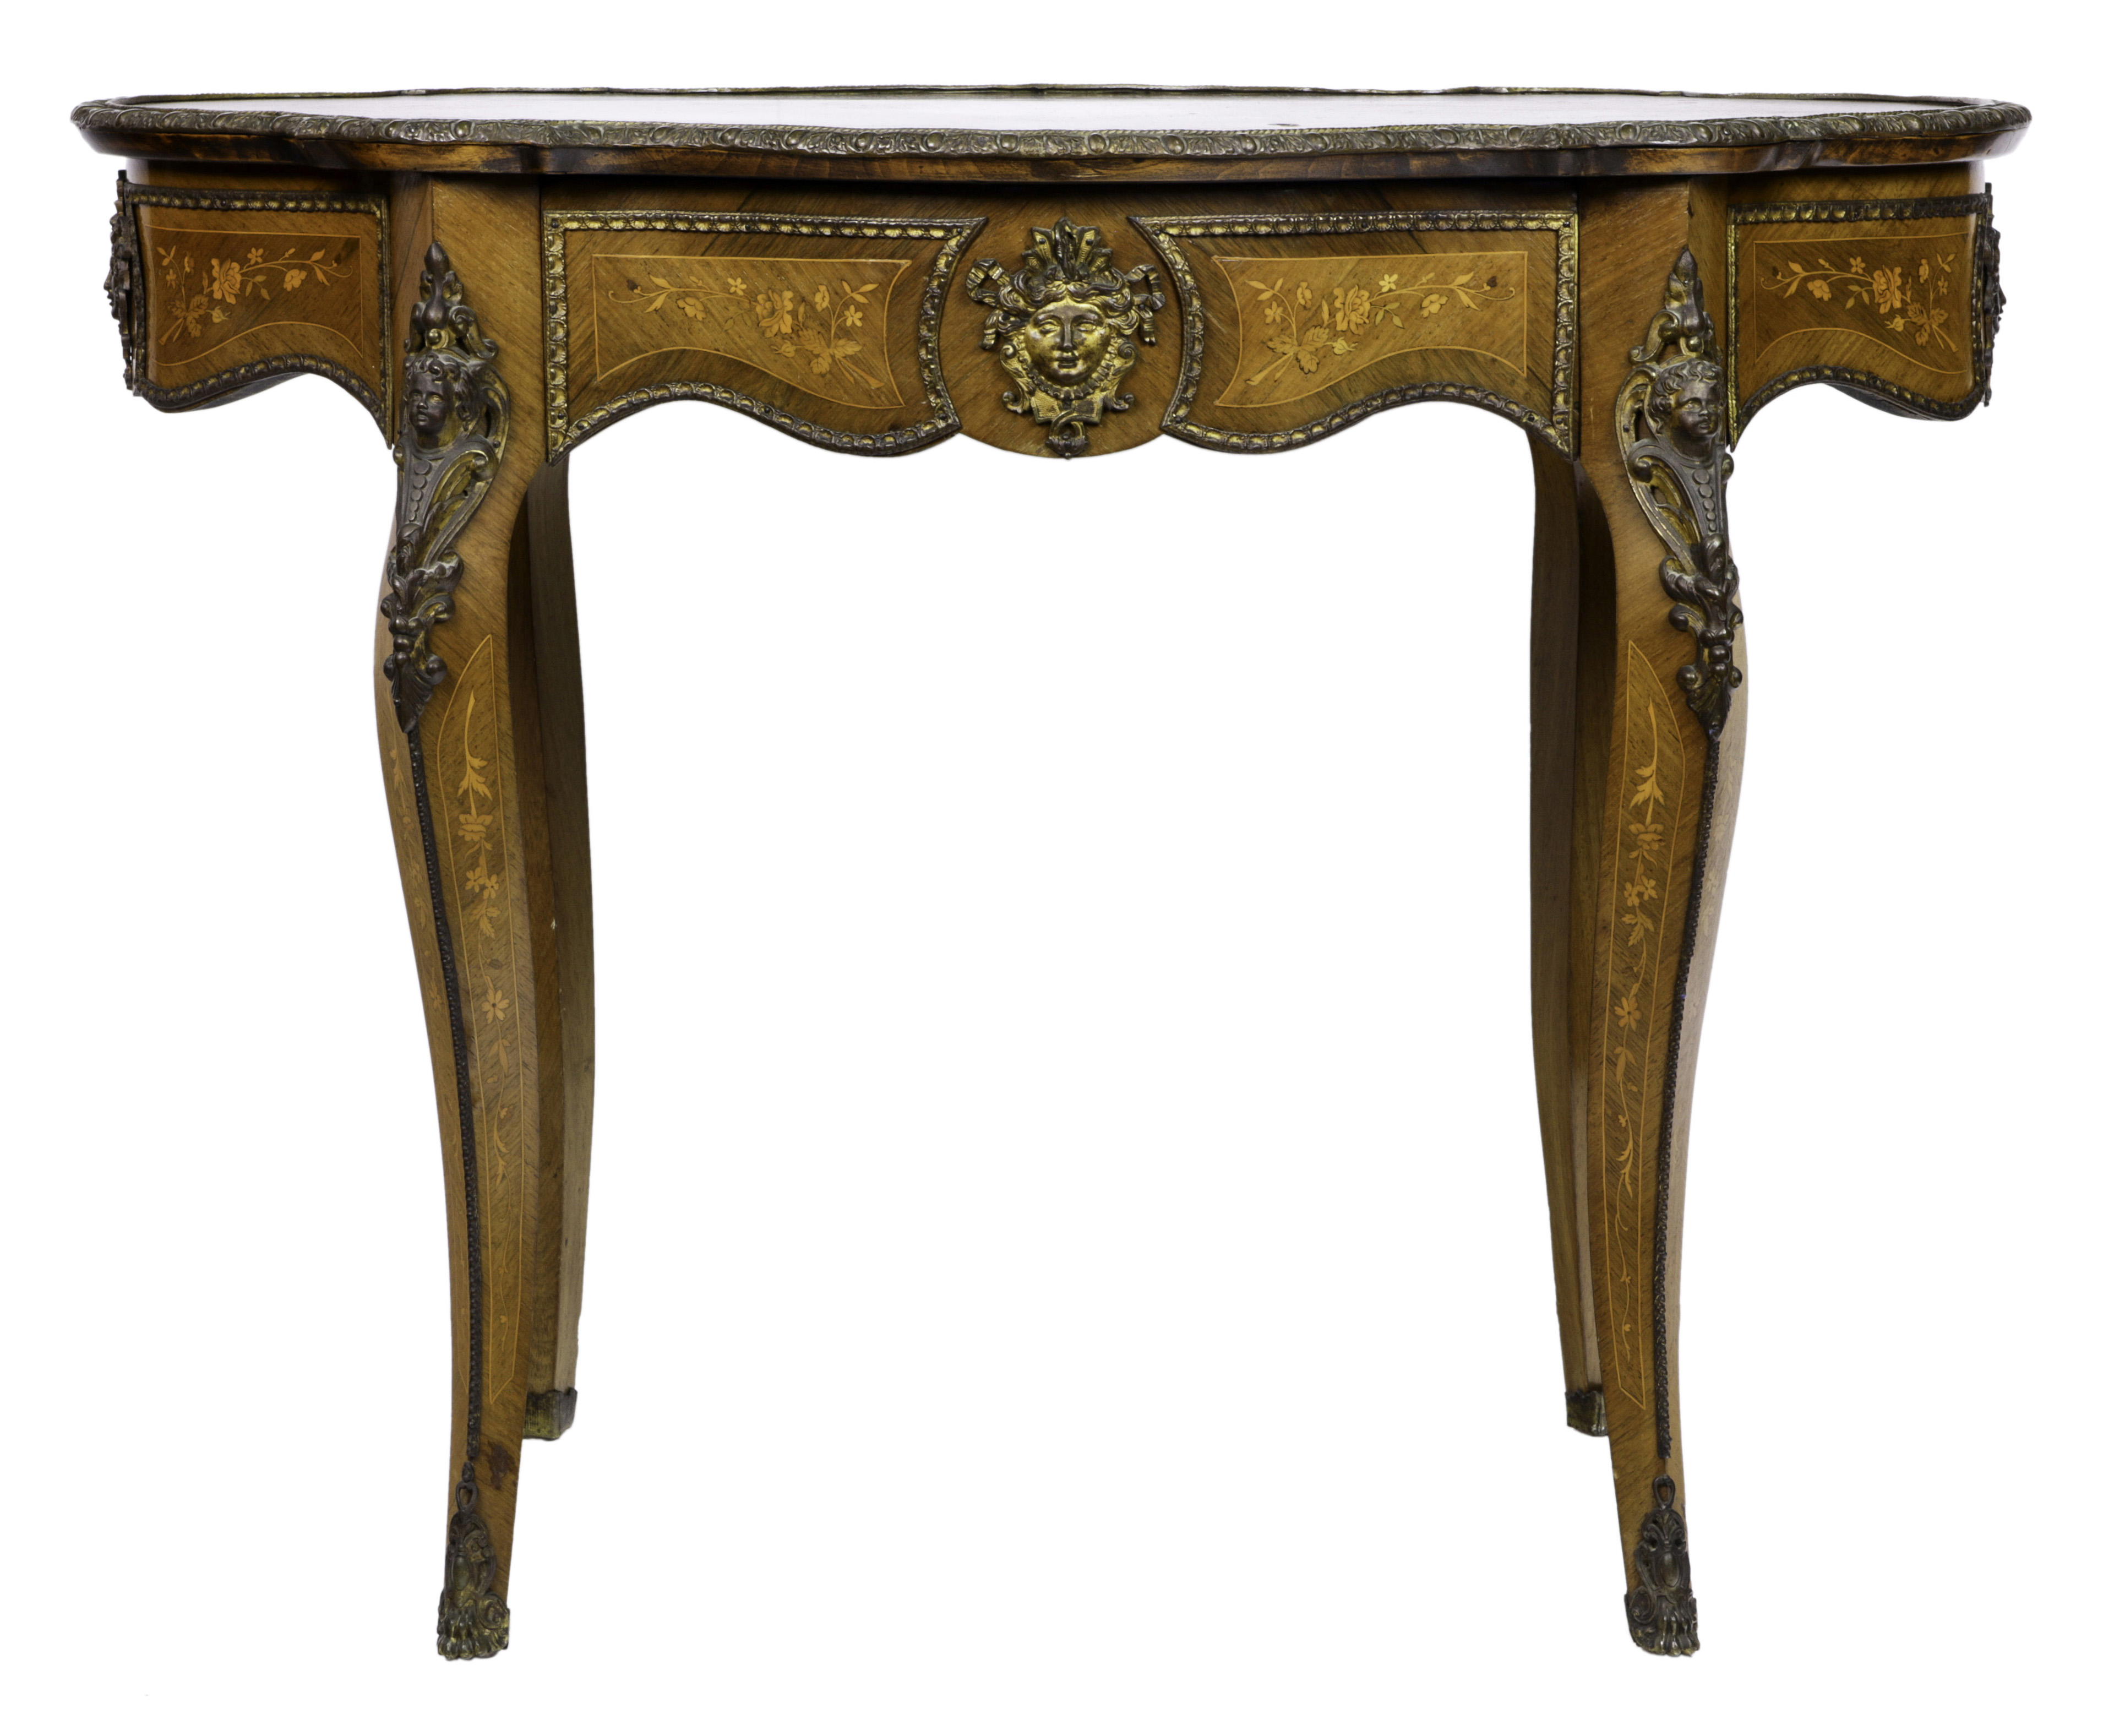 LOUIS XV STYLE MARQUETRY DECORATED 3a573a